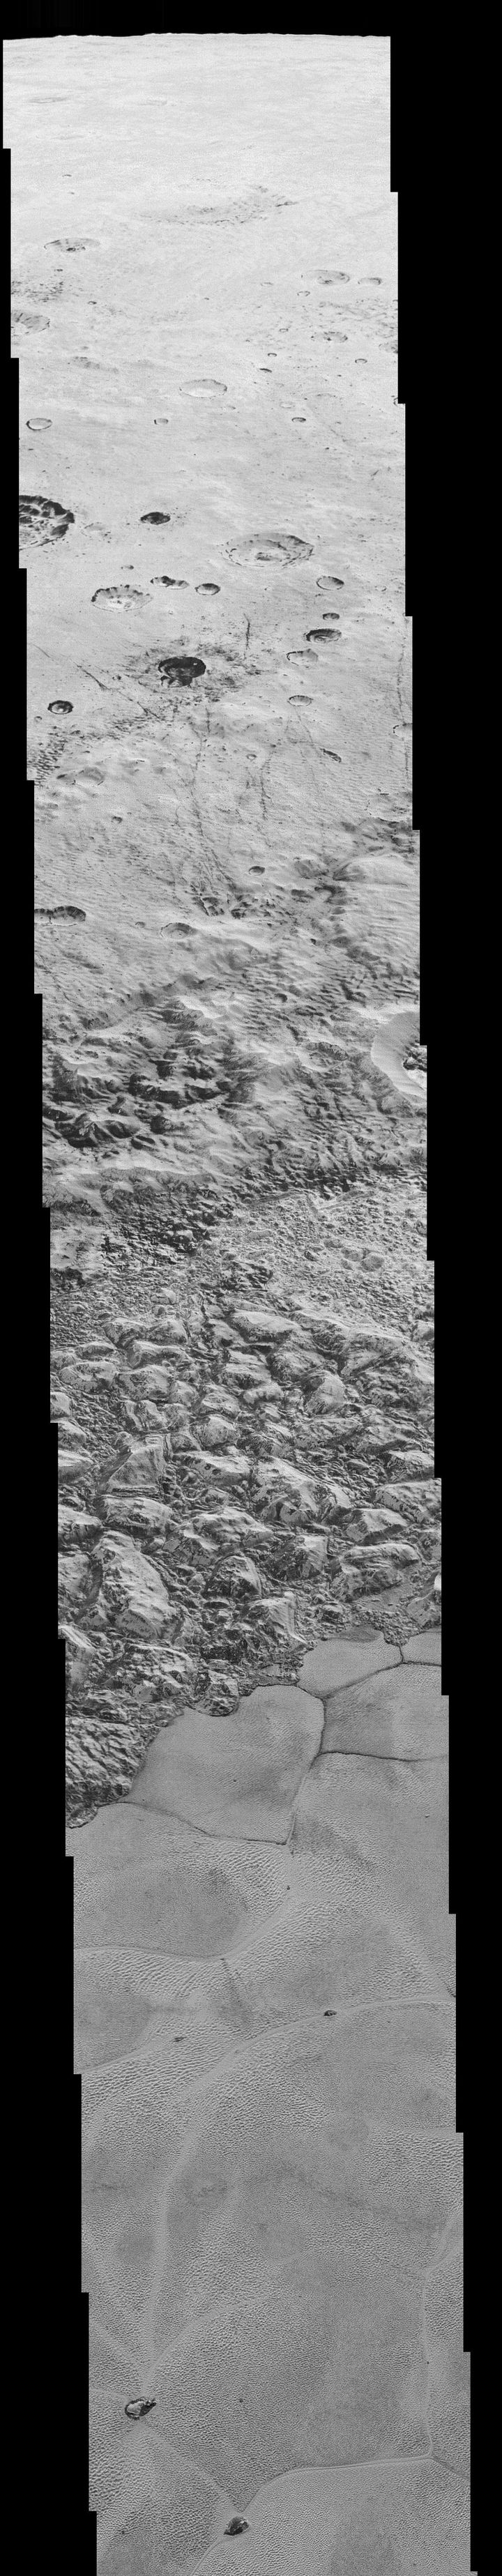 This mosaic of the highest-resolution images shows a 50-mile-wide strip of Pluto's terrain stretching across the al-Idrisi mountains.